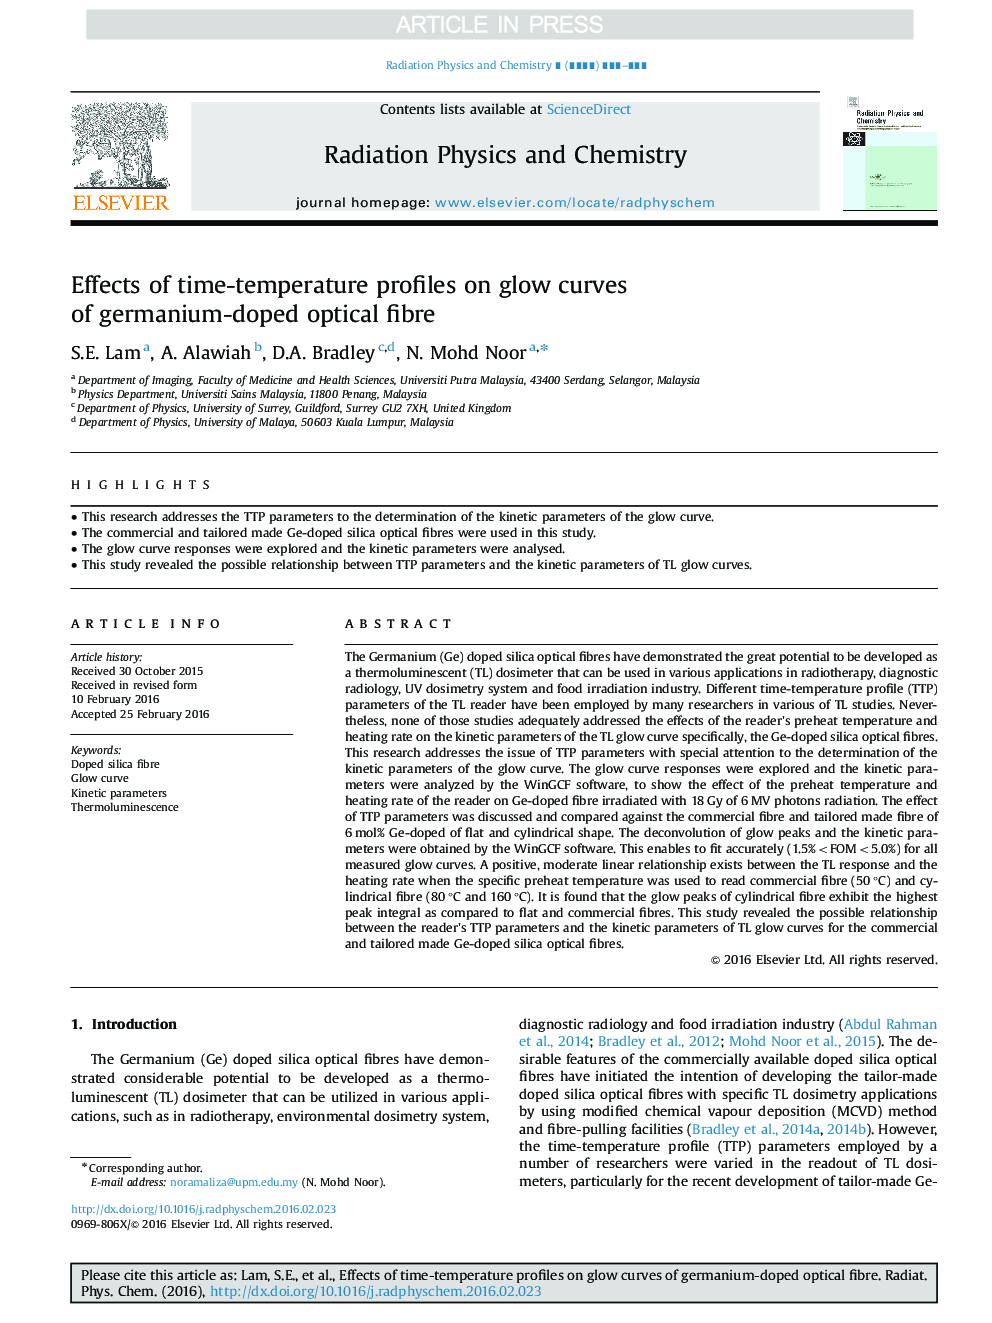 Effects of time-temperature profiles on glow curves of germanium-doped optical fibre